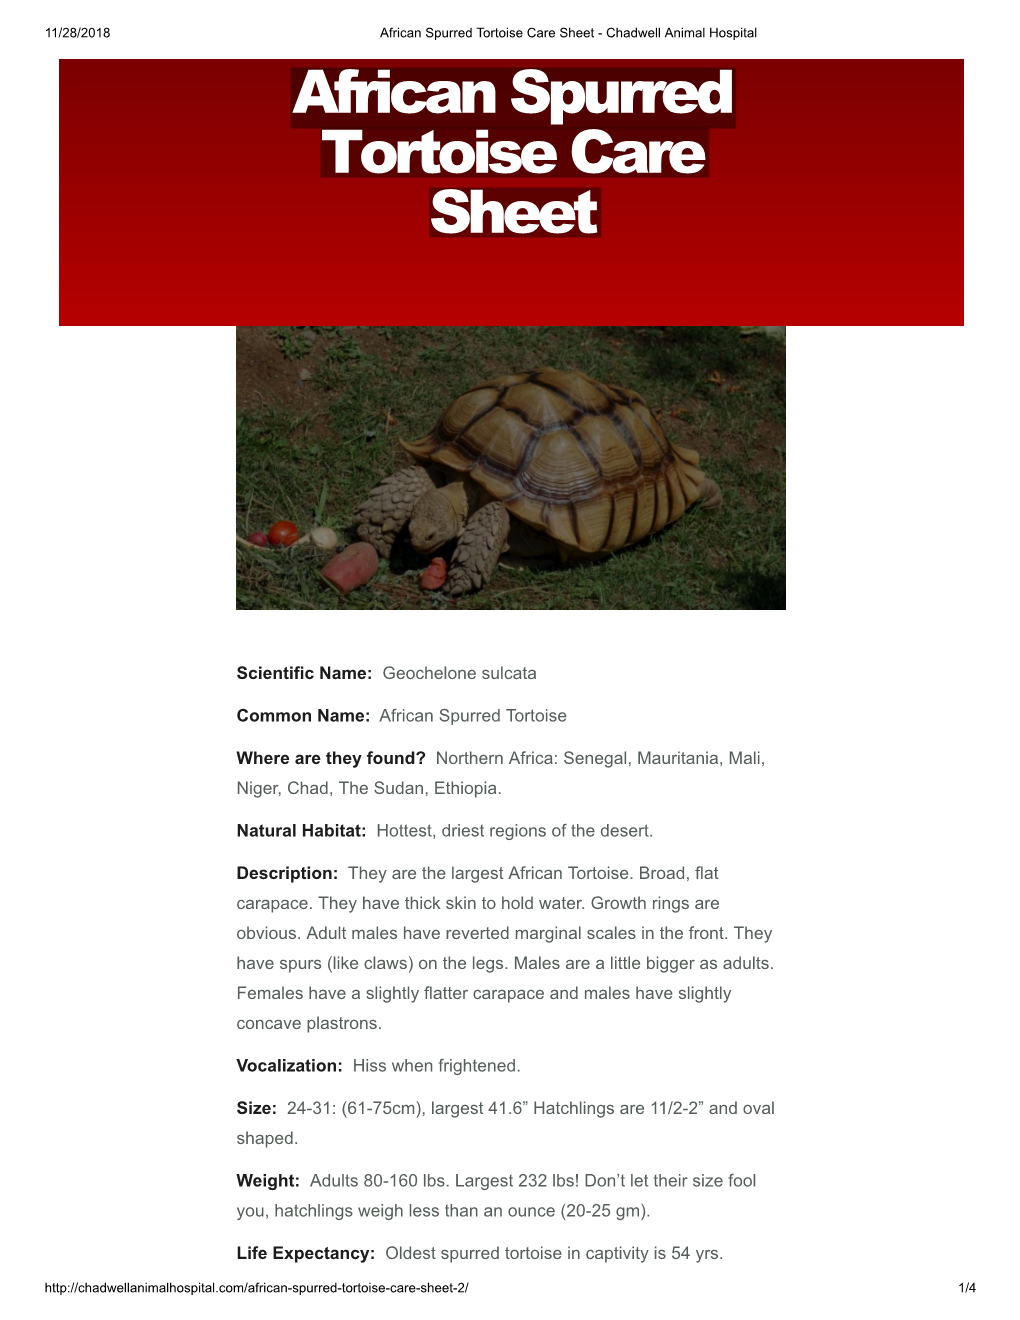 African Spurred Tortoise Care Sheet - Chadwell Animal Hospital African Spurred Tortoise Care Sheet